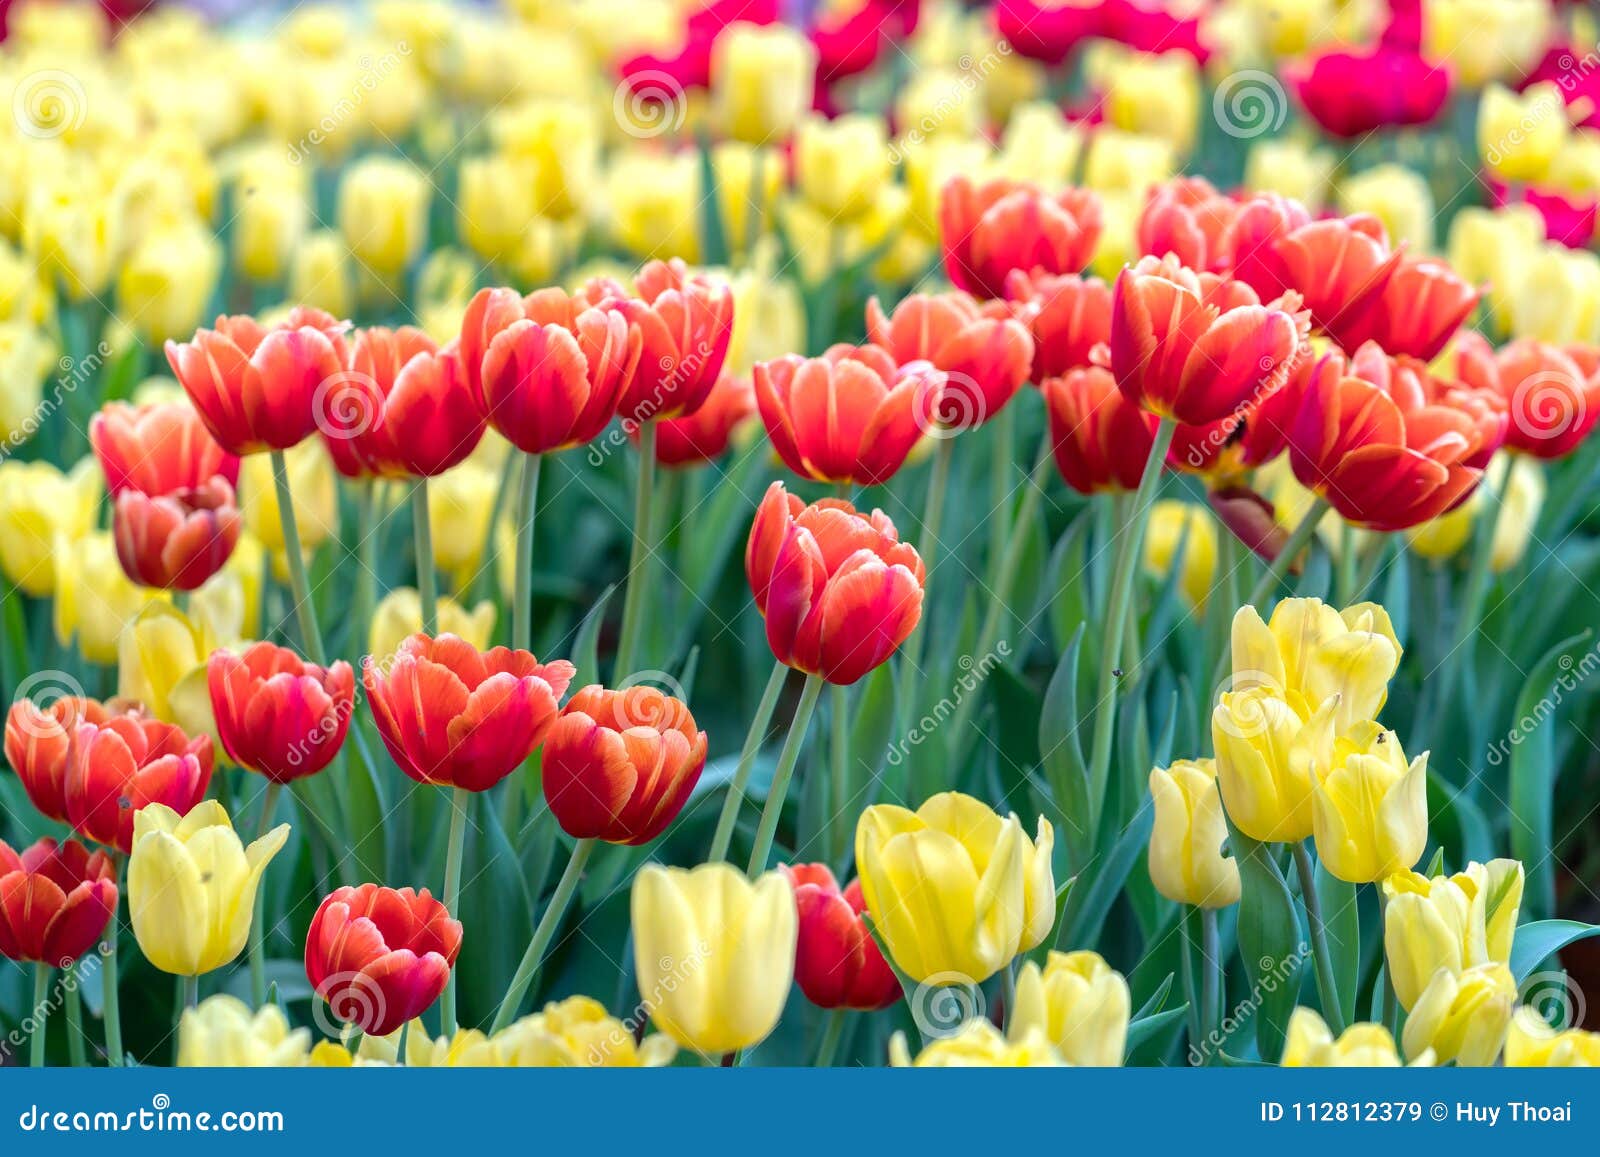 Tulips Bloom in the Spring Sunshine Stock Image - Image of multi ...